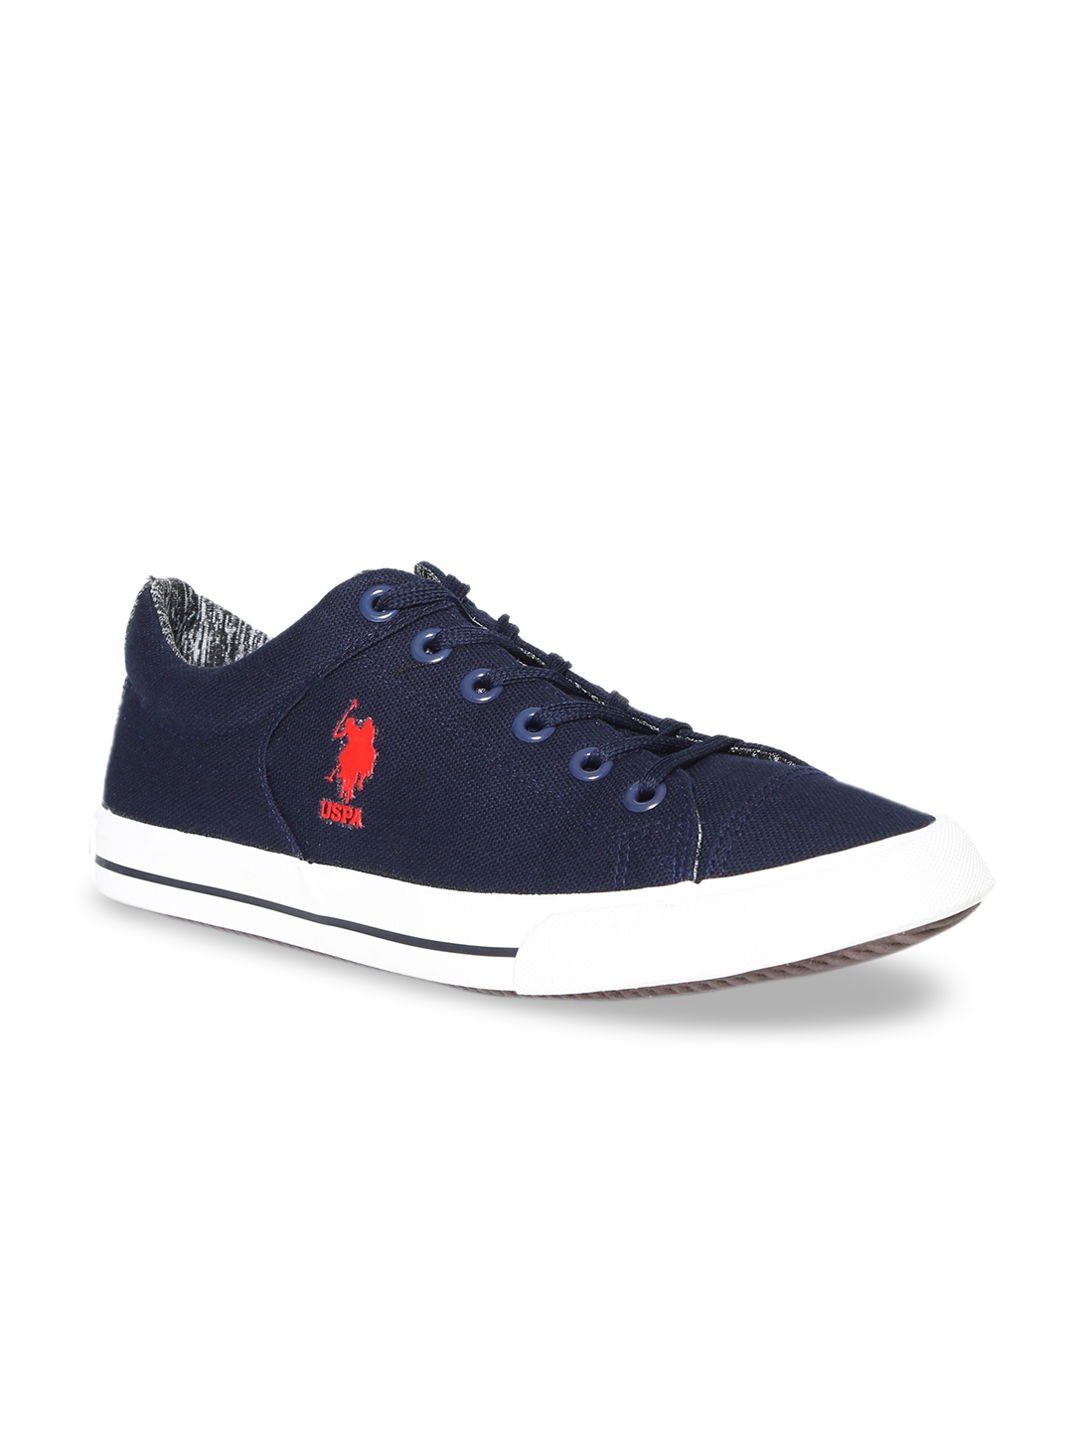 Buy U.S. Polo Assn. Men Navy Blue Solid Sneakers - Casual Shoes for Men ...